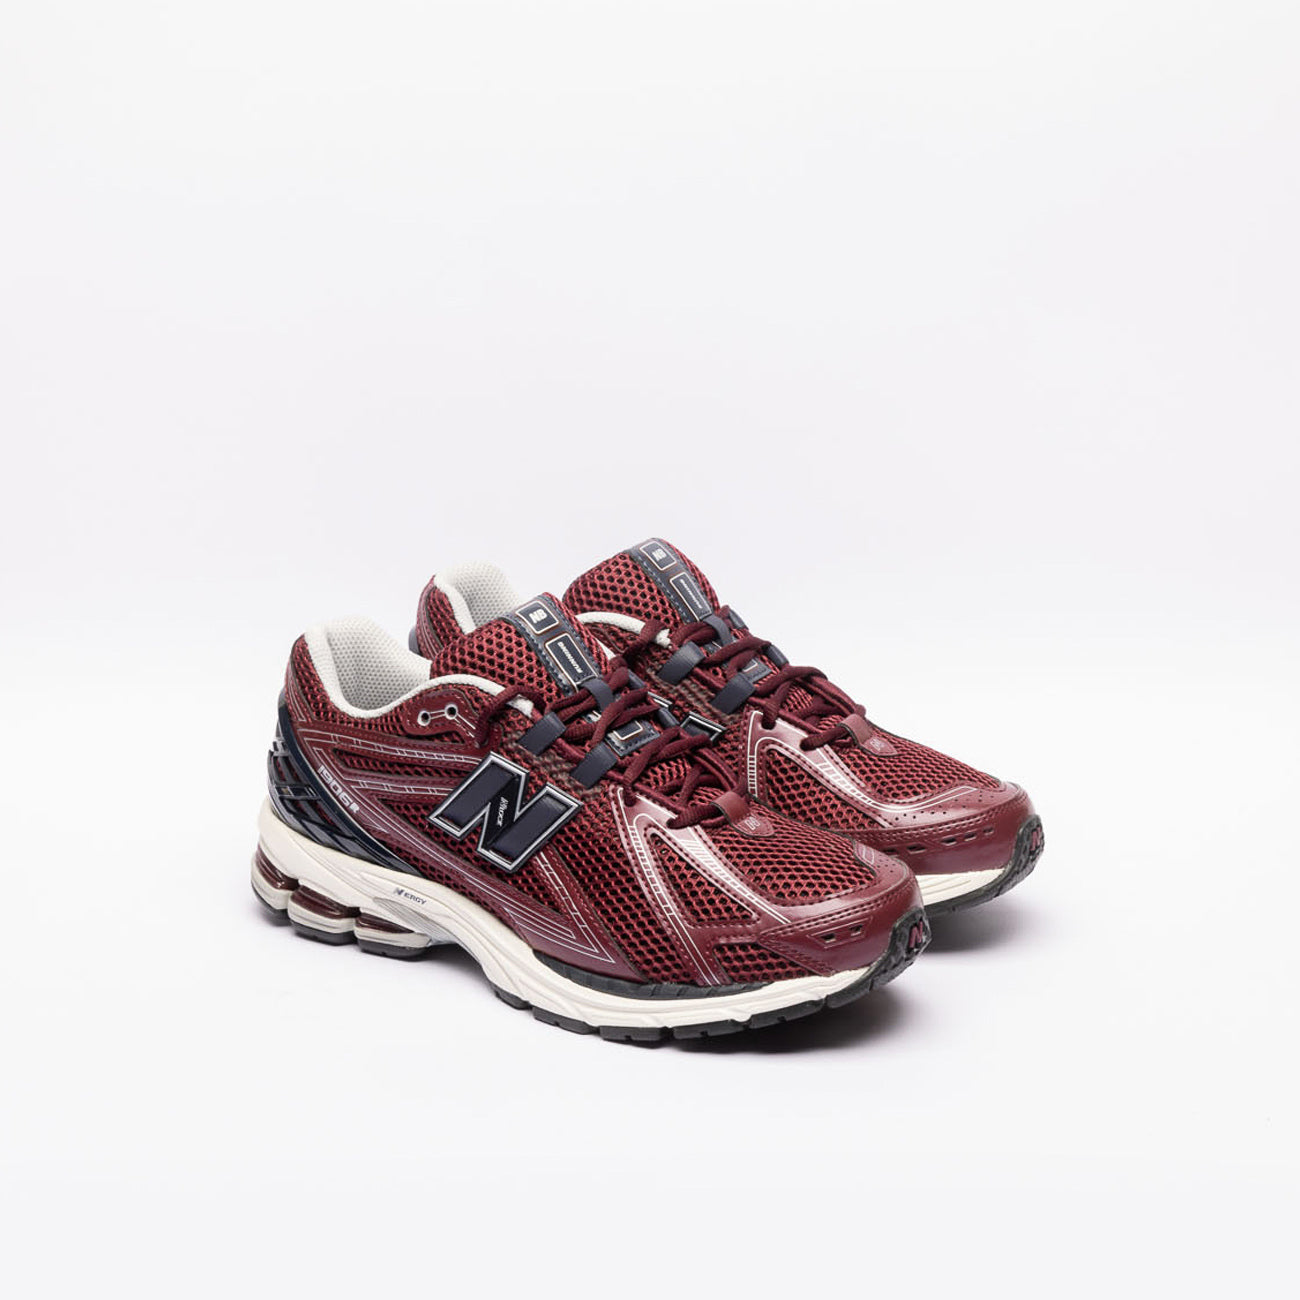 New Balance 1906R burgundy leather and fabric fashion running sneaker